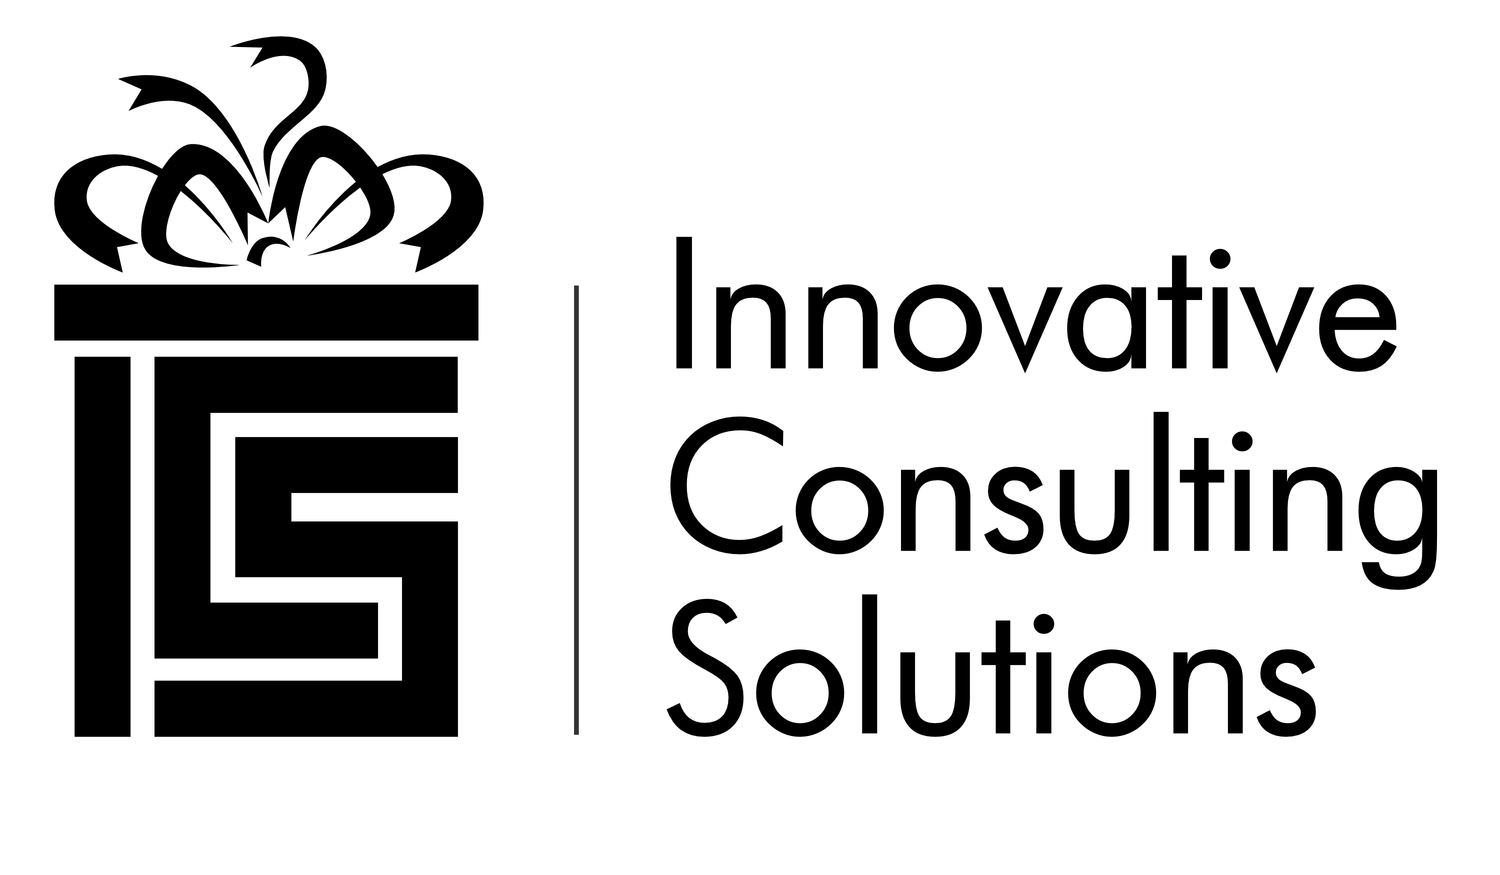 Innovative Consulting Solutions